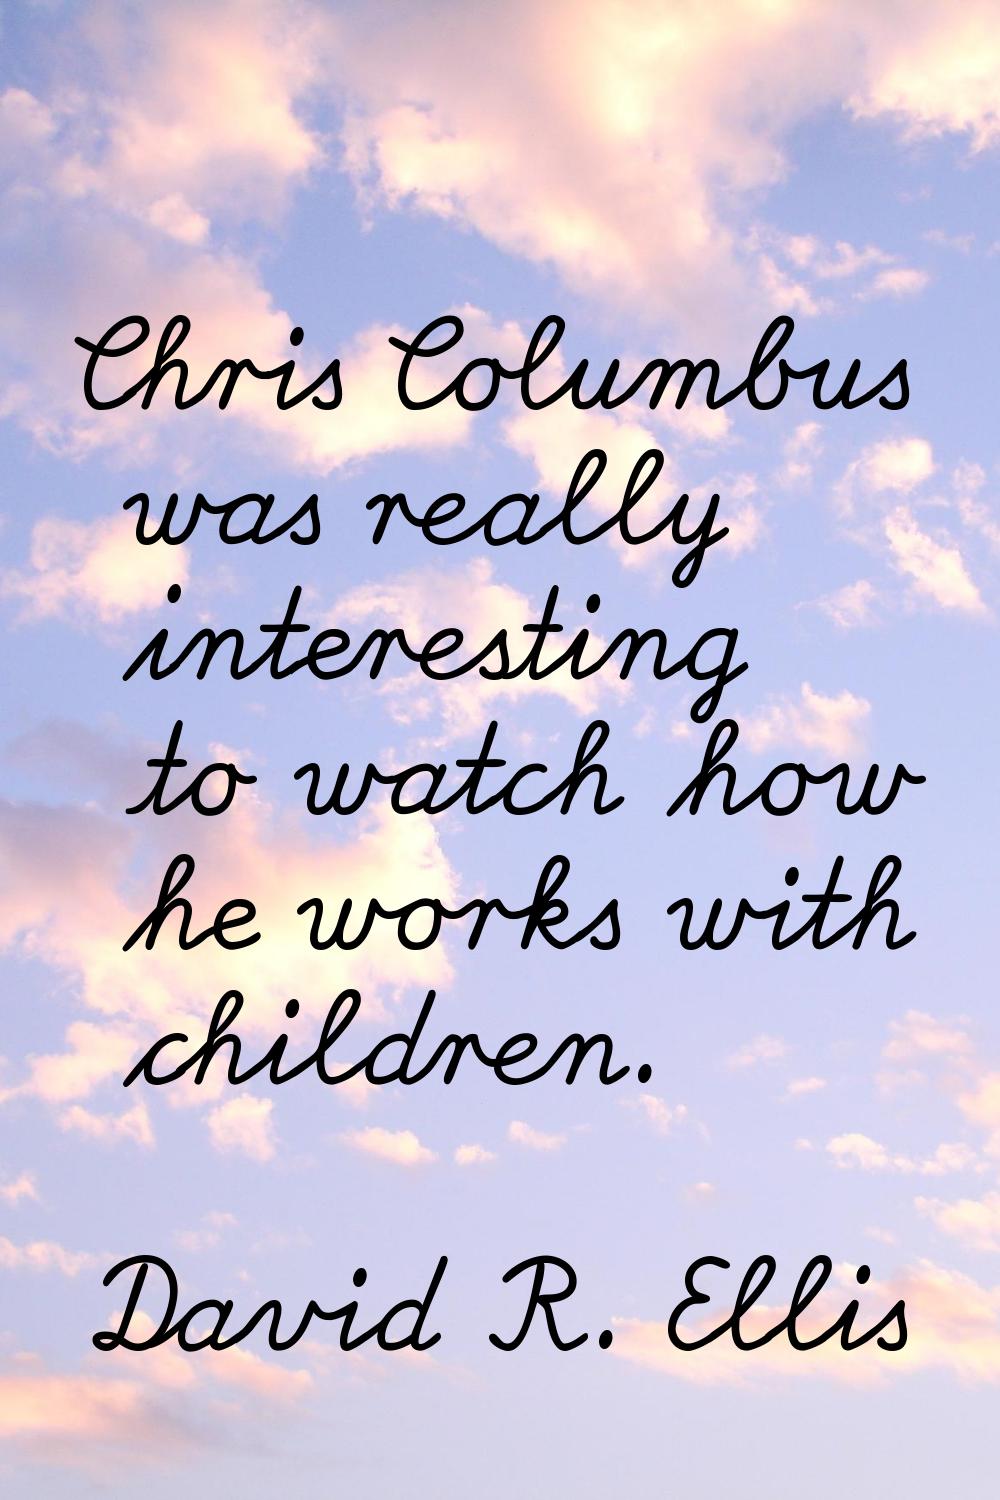 Chris Columbus was really interesting to watch how he works with children.